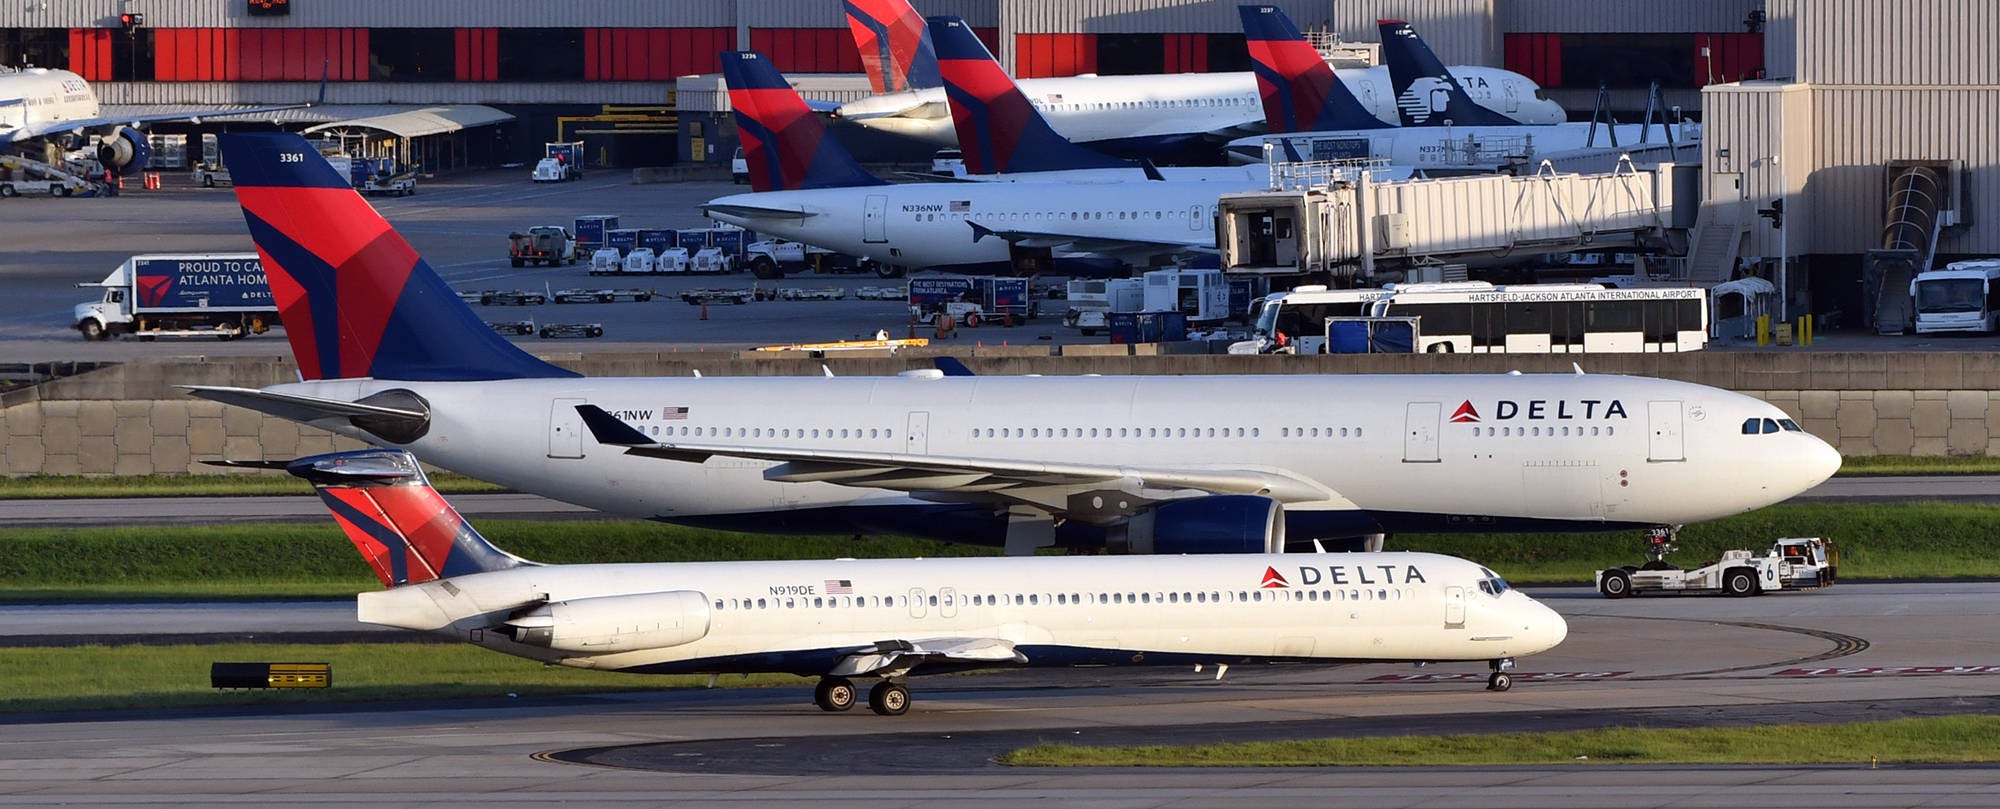 Delta Airlines airplanes at the Atlanta airport